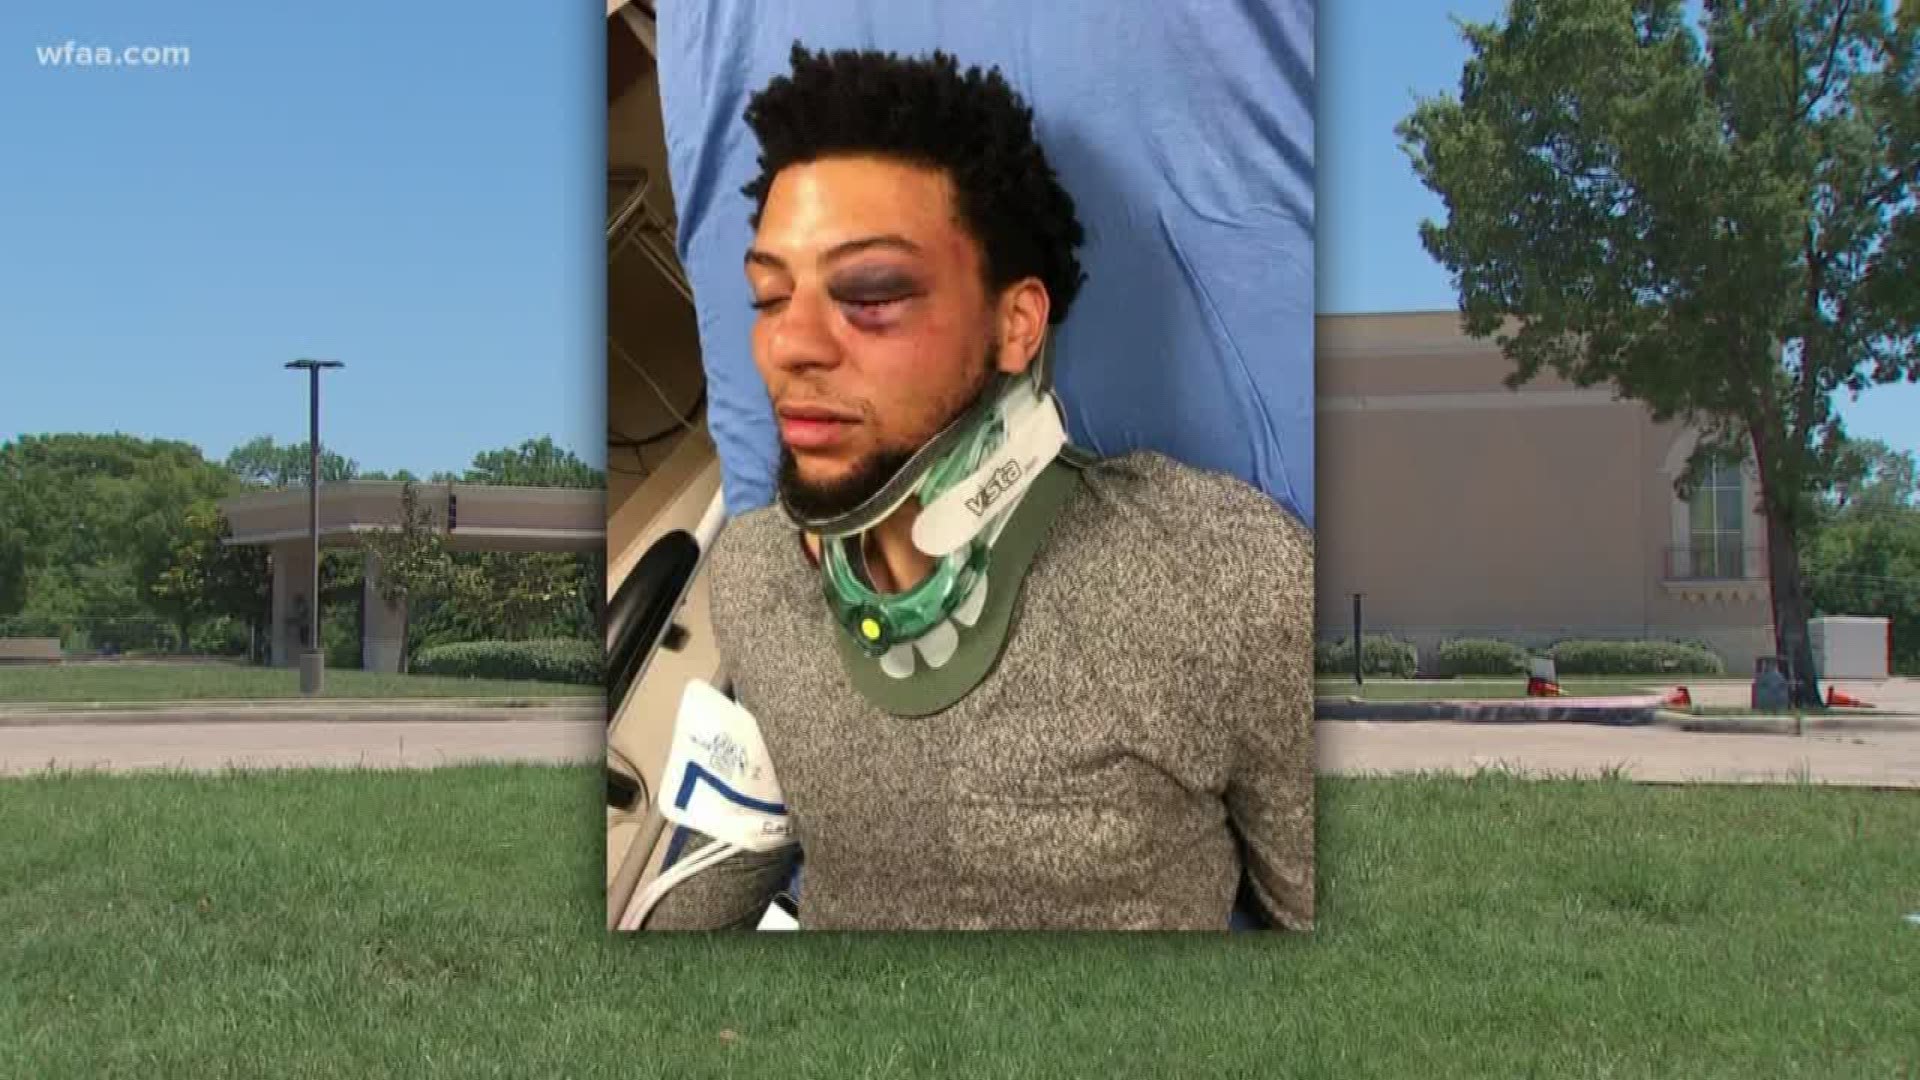 Jalen Bell, 24, claims a group of white security guards shouted racial slurs at him as they choked and beat him inside XTC Cabaret Dallas early Sunday morning. 